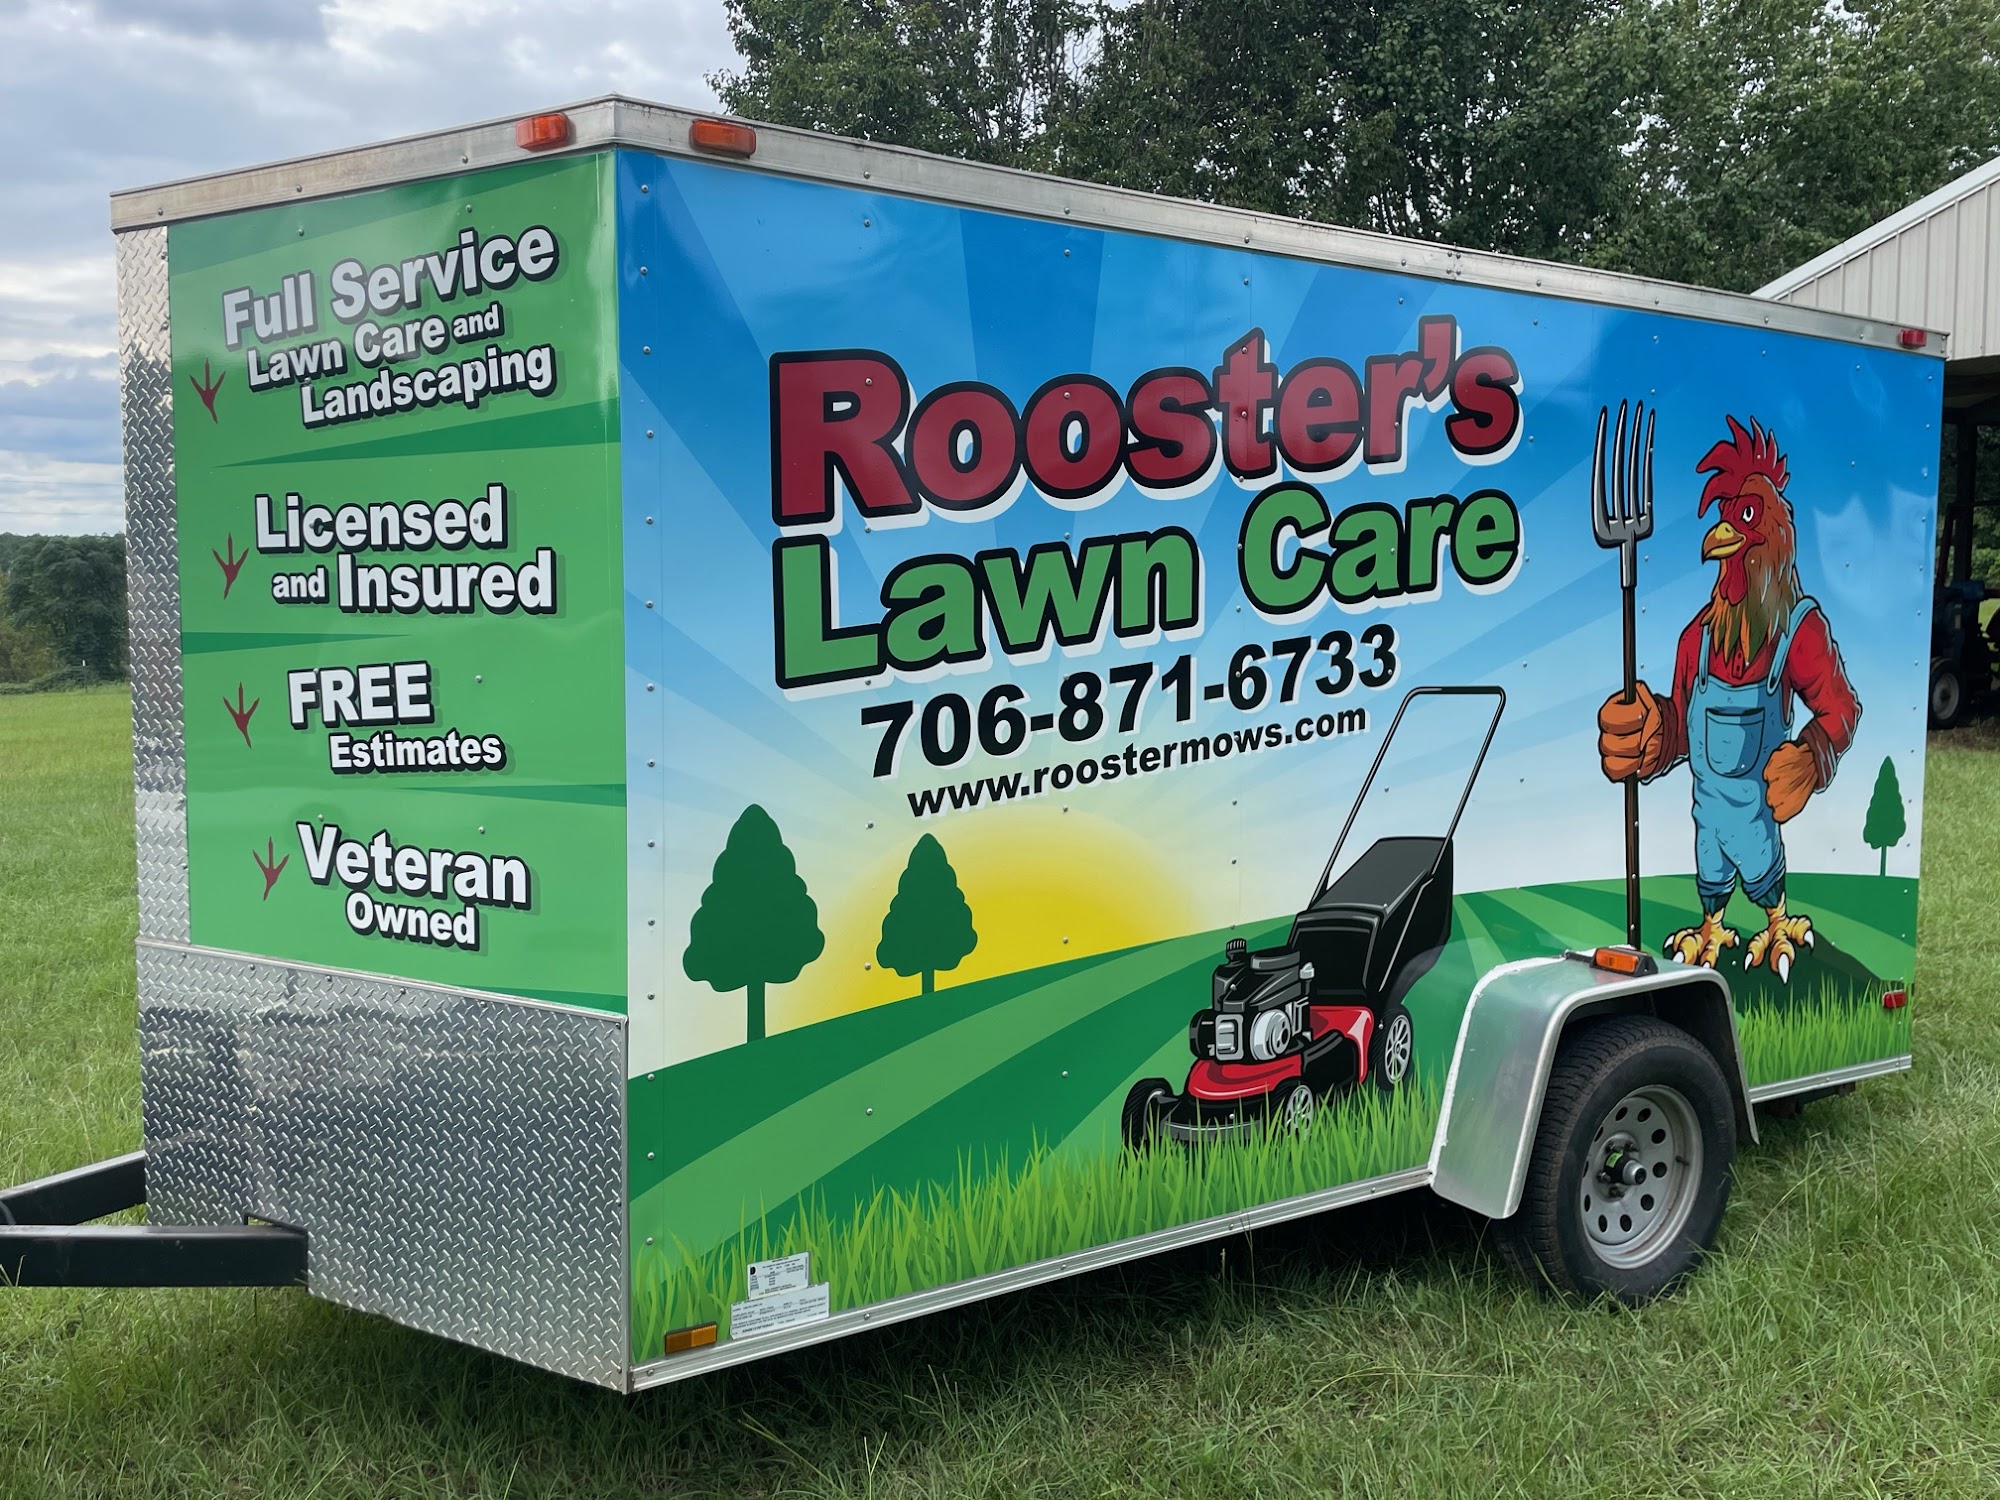 Rooster's Lawn Care